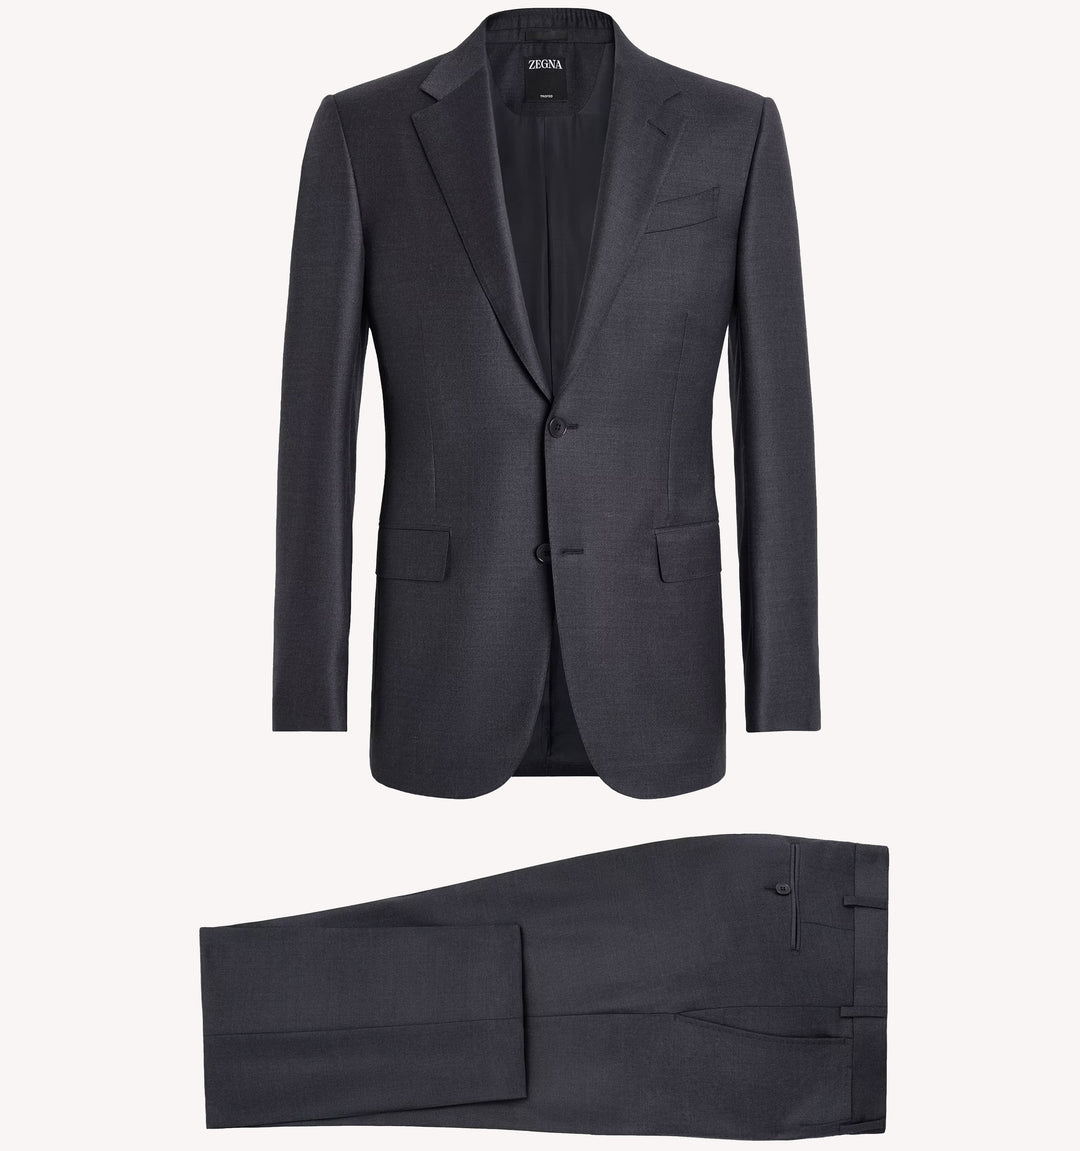 Zegna Suit in Charcoal